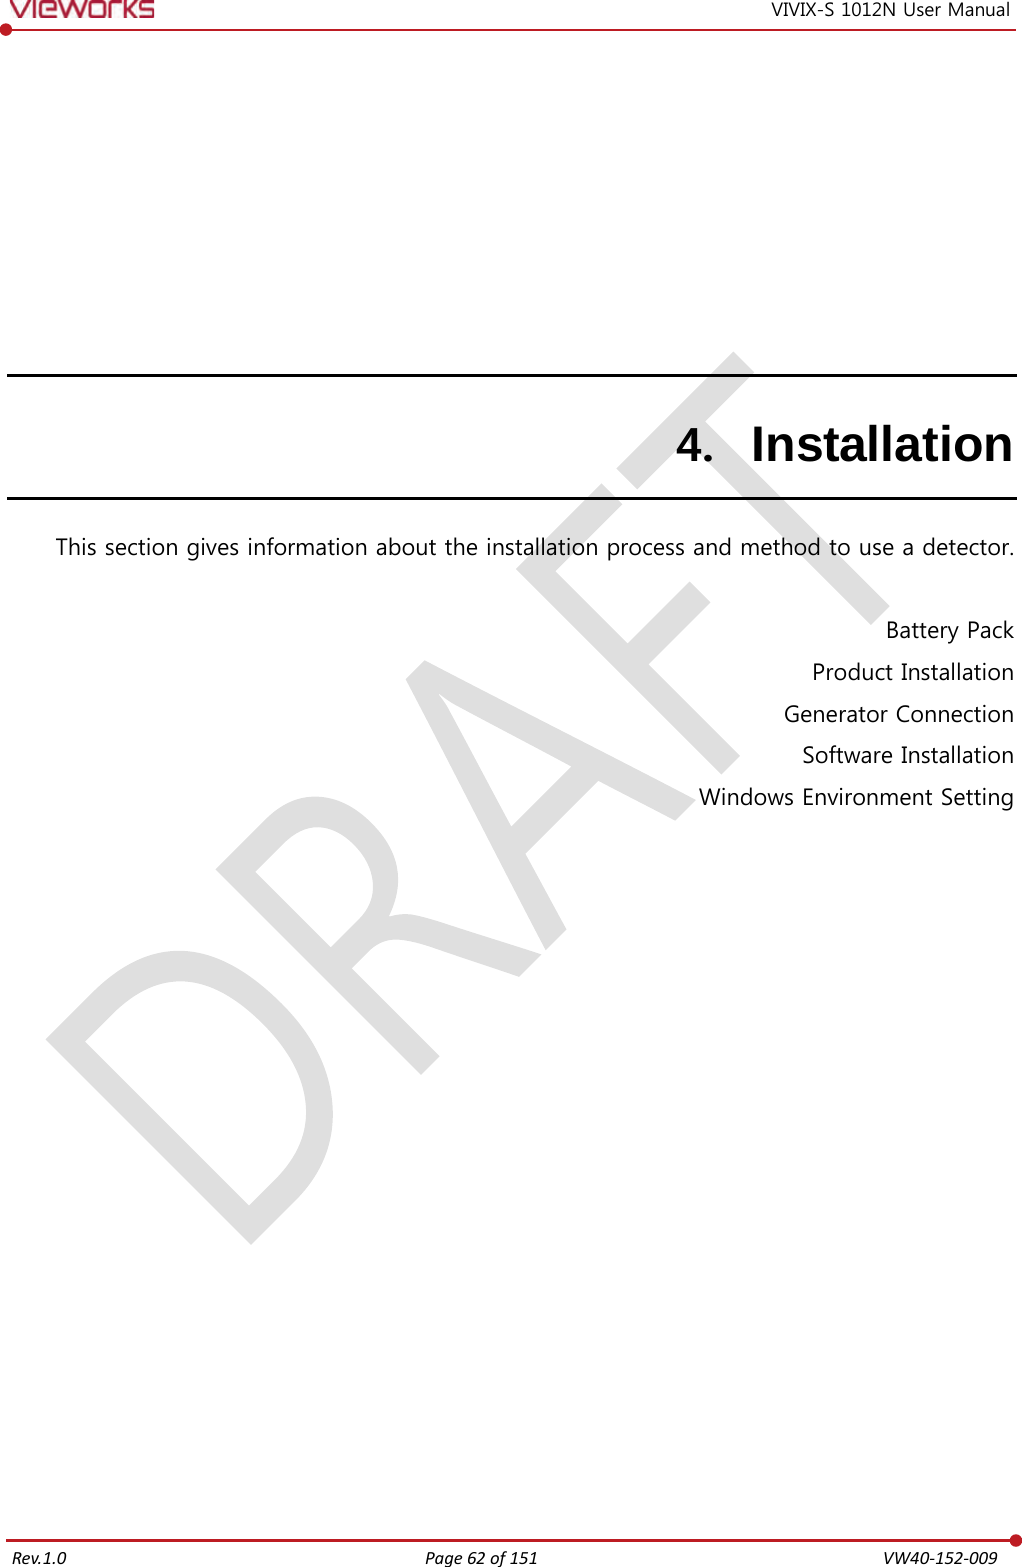   Rev.1.0 Page 62 of 151  VW40-152-009 VIVIX-S 1012N User Manual 4. Installation This section gives information about the installation process and method to use a detector.  Battery Pack Product Installation Generator Connection Software Installation Windows Environment Setting         